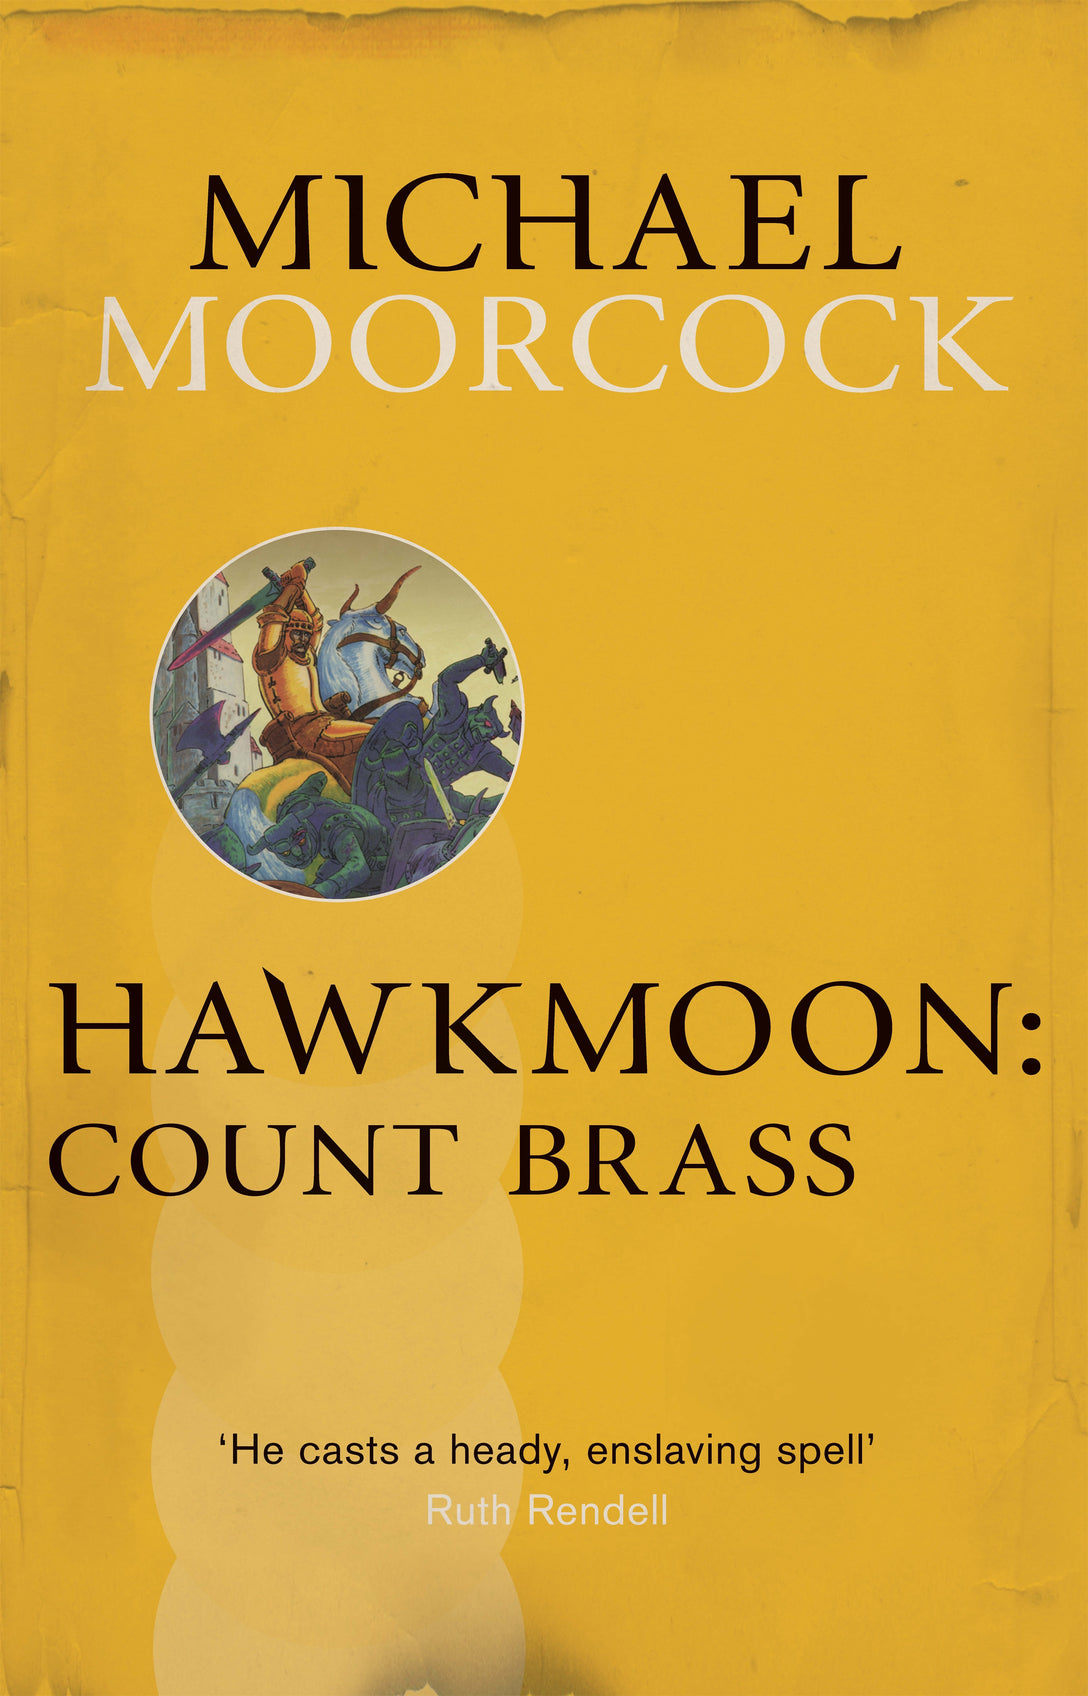 Hawkmoon: Count Brass by Michael Moorcock